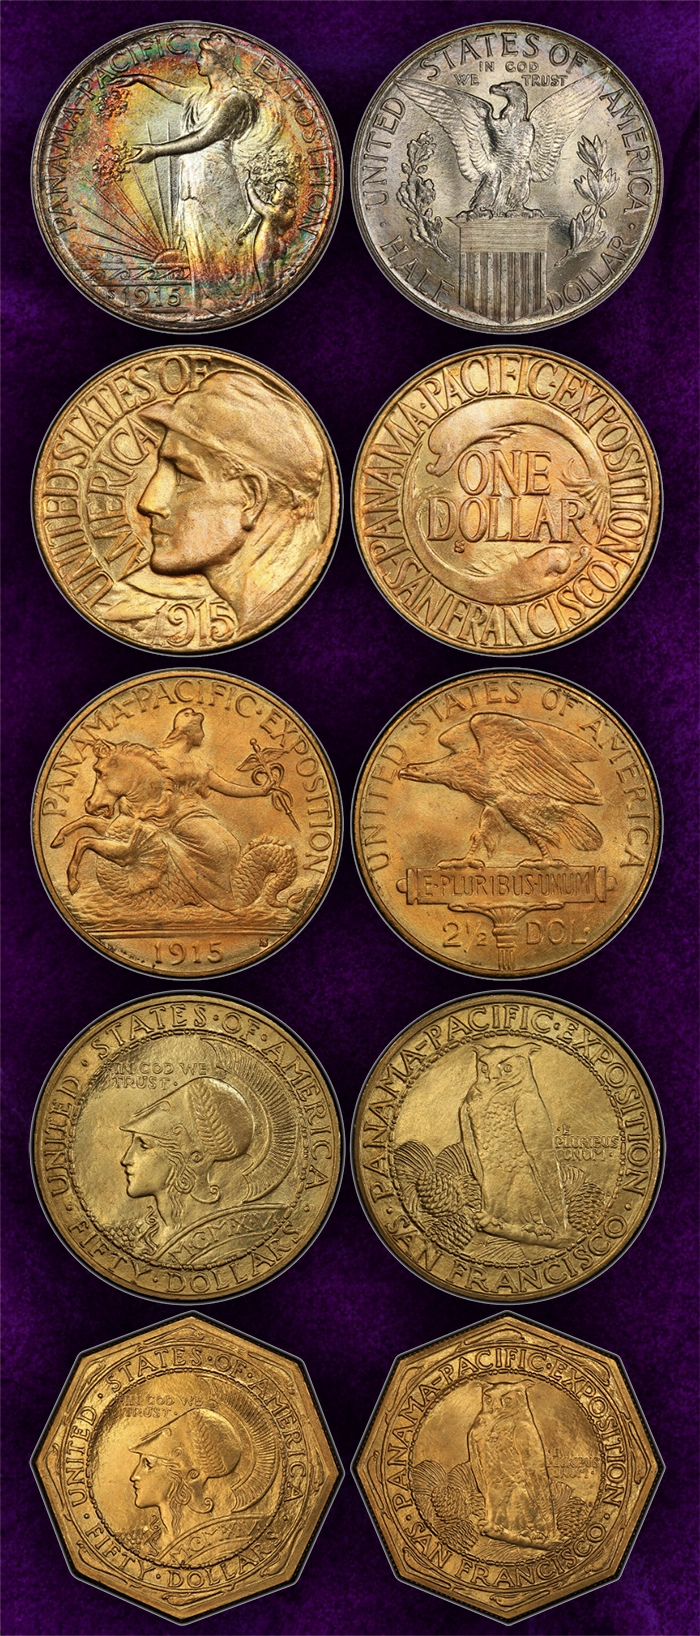 The 1915-S Panama-Pacific Half Dollar, Gold Dollar, Quarter Eagle, and Round and Octagonal $50 coins. Courtesy of PCGS TrueView.